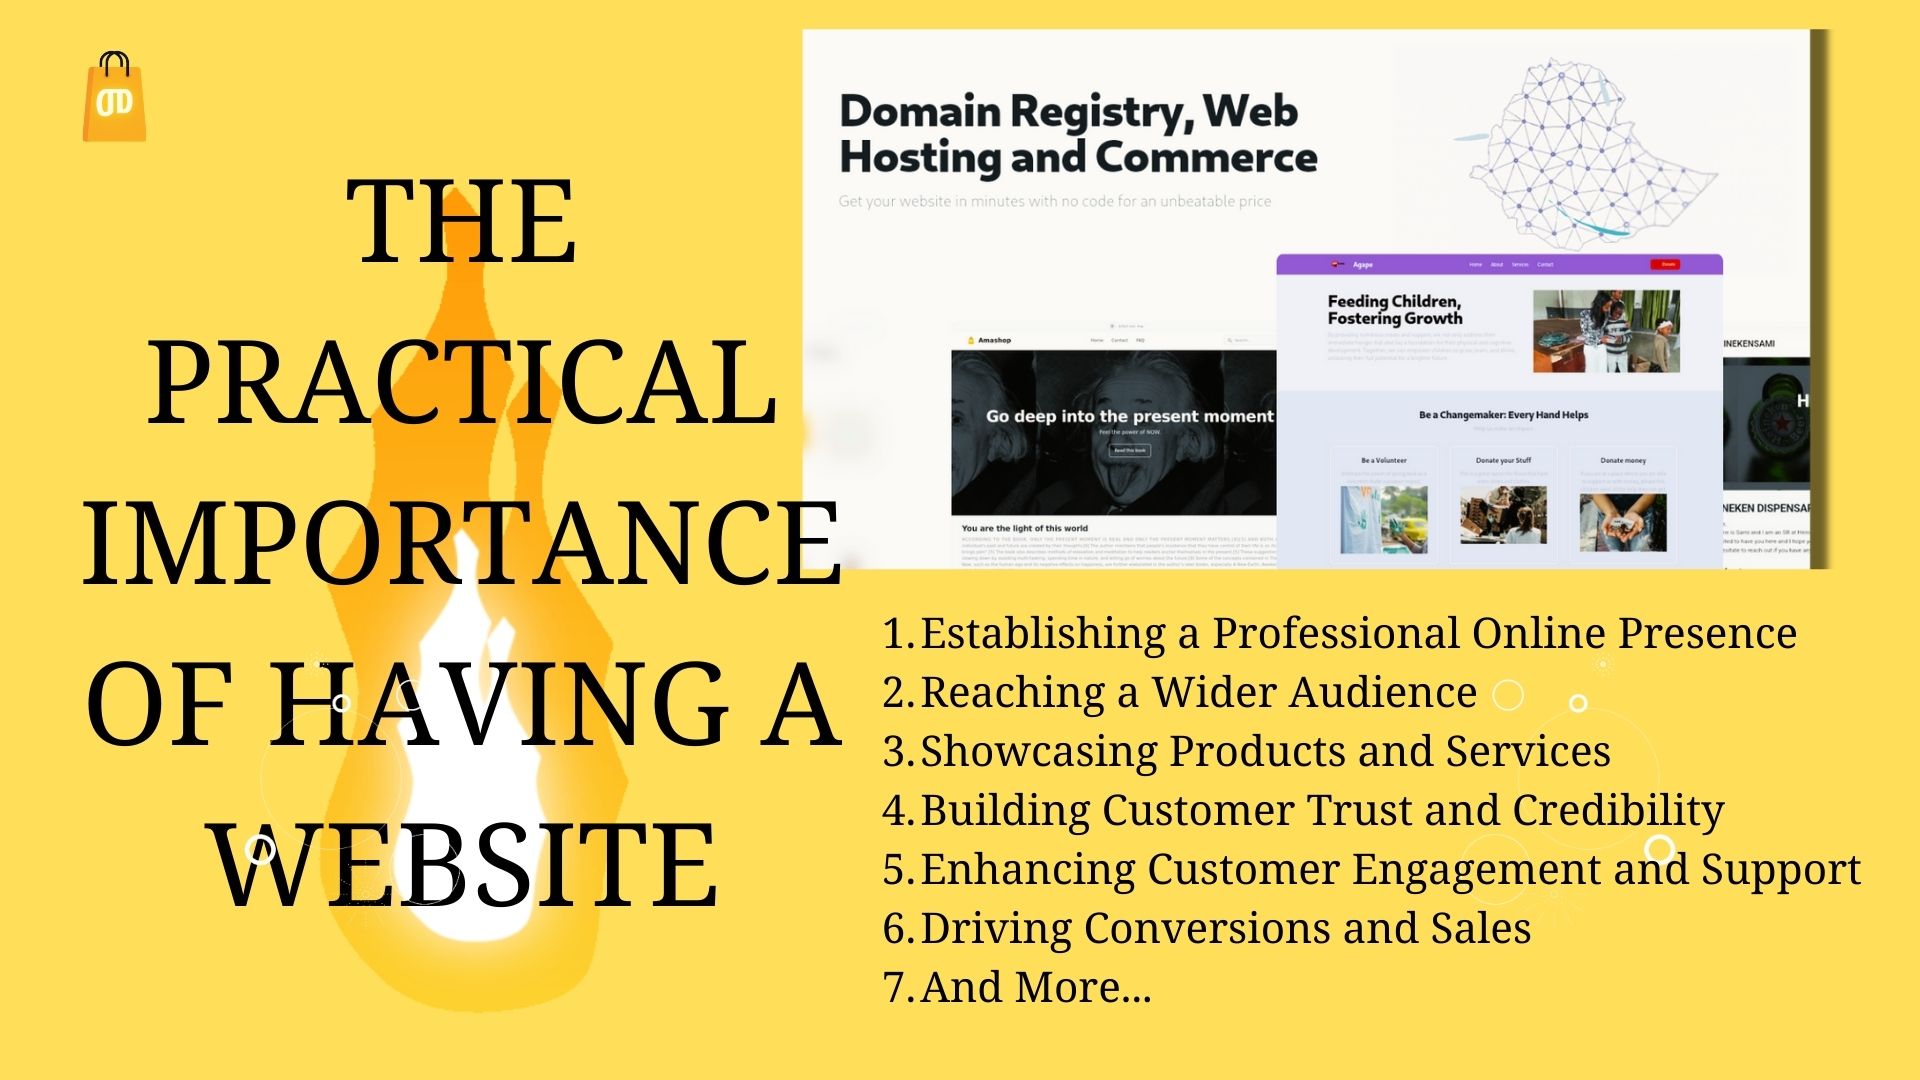 Image showing the practical importance of having a website